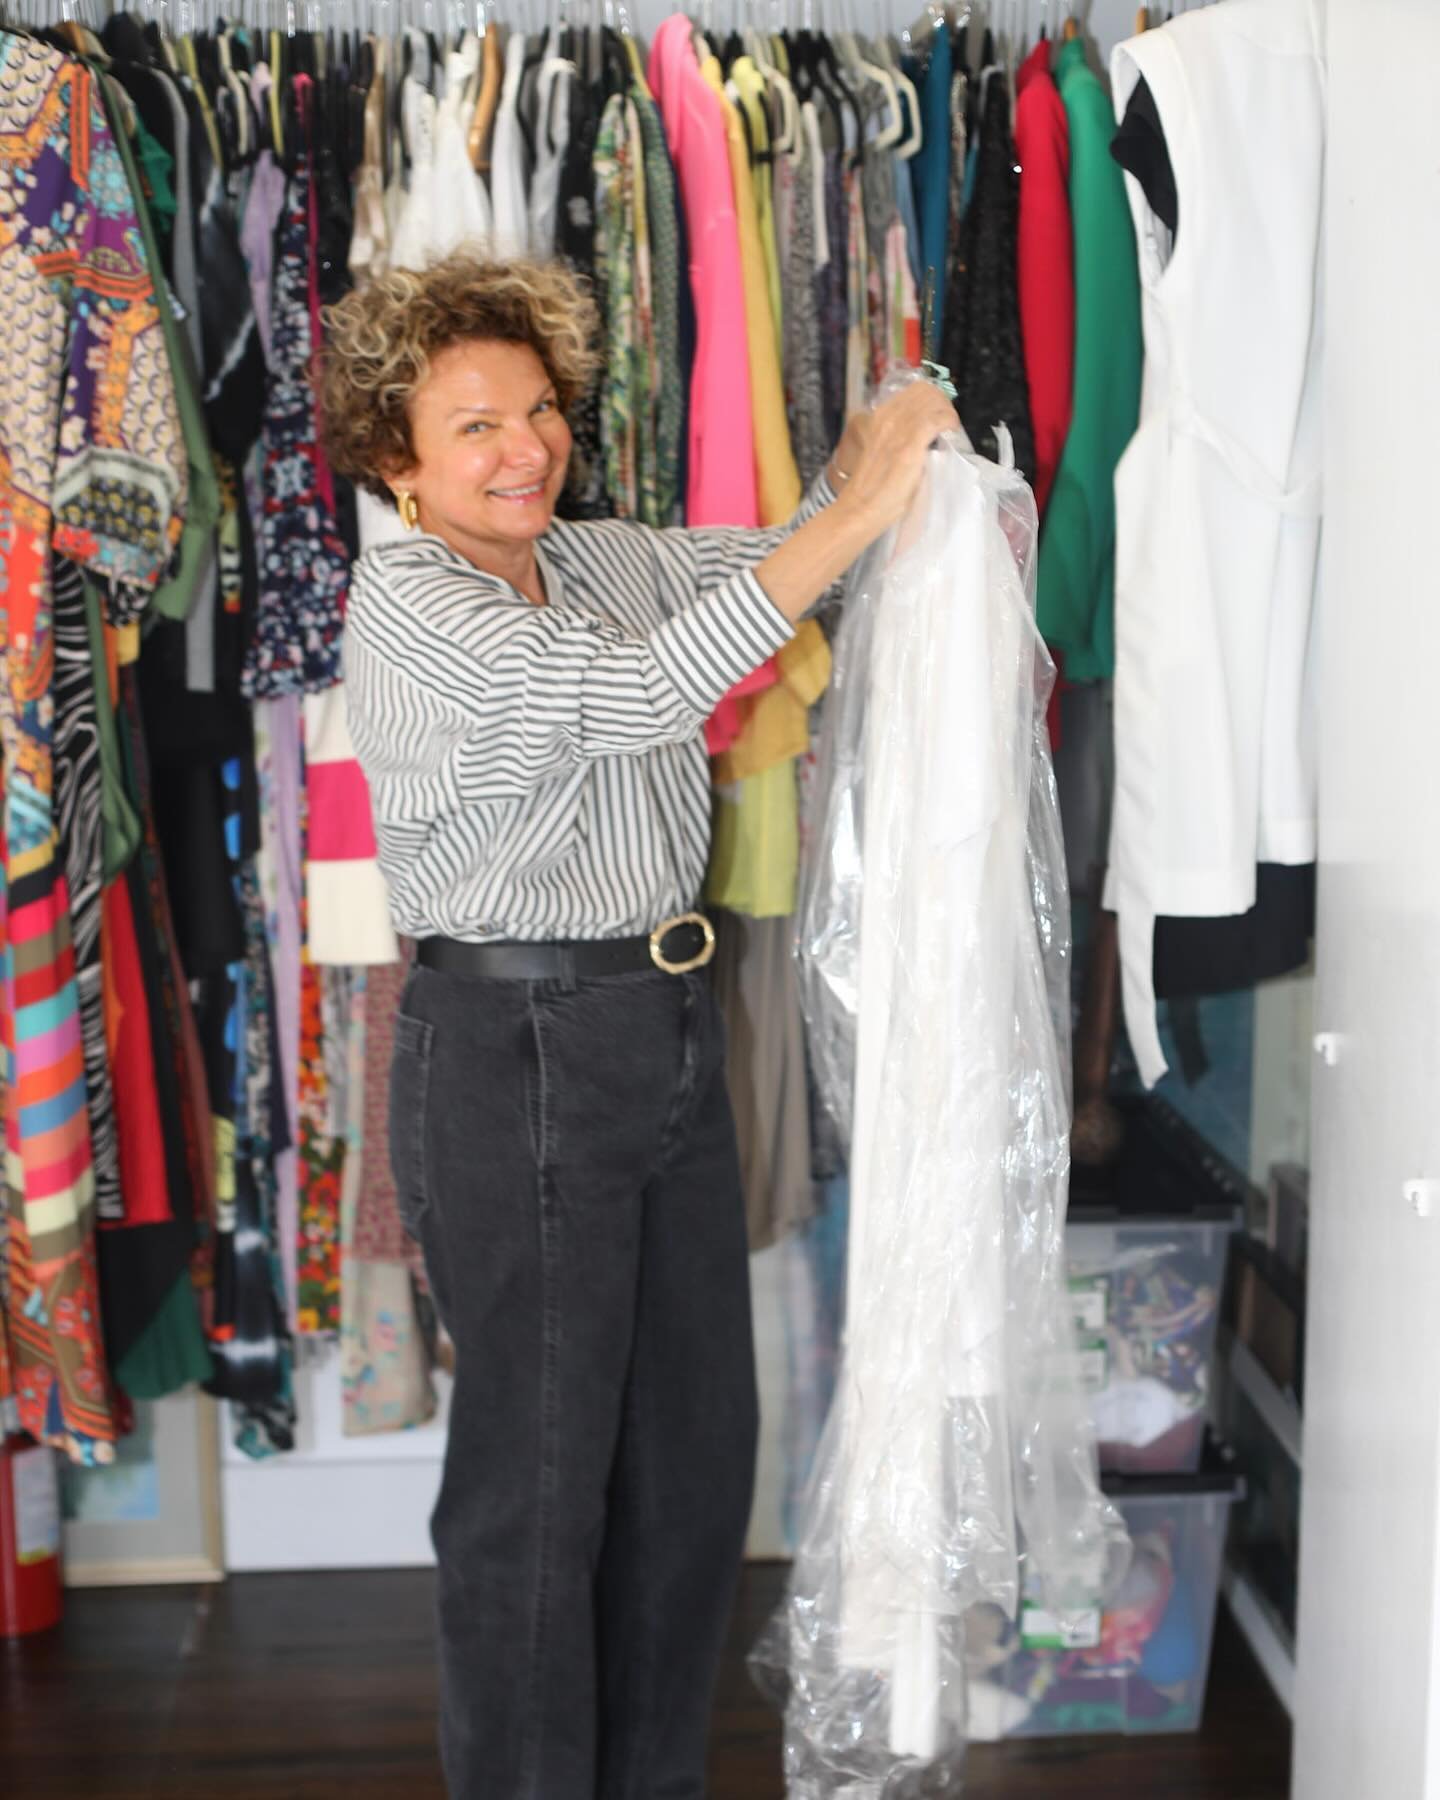 You probably have heard this before:

The hangers and plastic covers from the dry cleaners are made only for transportation. 

As soon as possible, change the hangers to the ones you use in your closet, and remove the plastic cover.

I know that you 